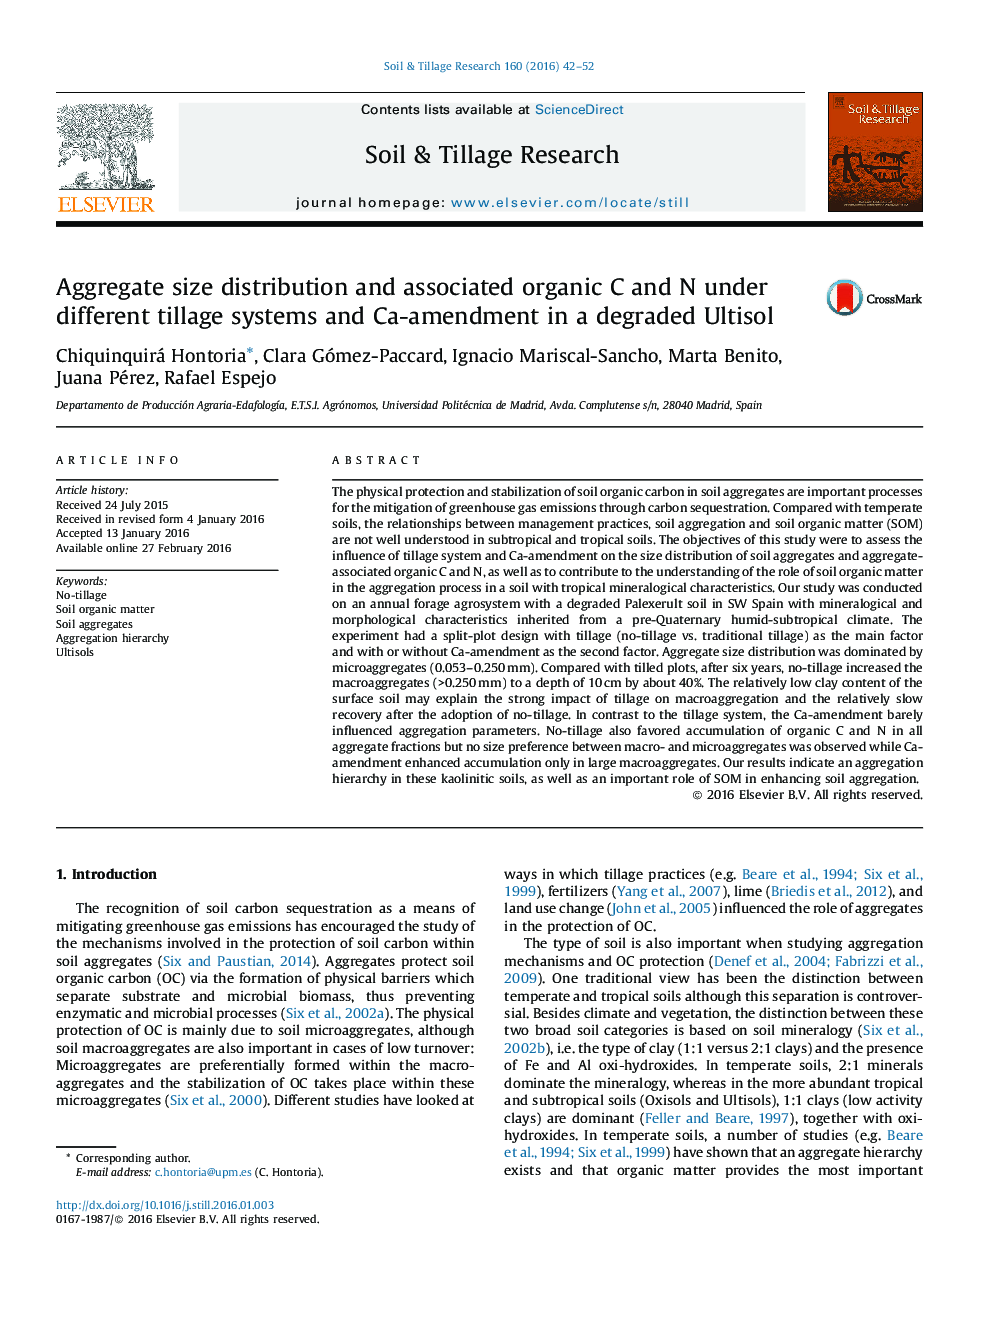 Aggregate size distribution and associated organic C and N under different tillage systems and Ca-amendment in a degraded Ultisol